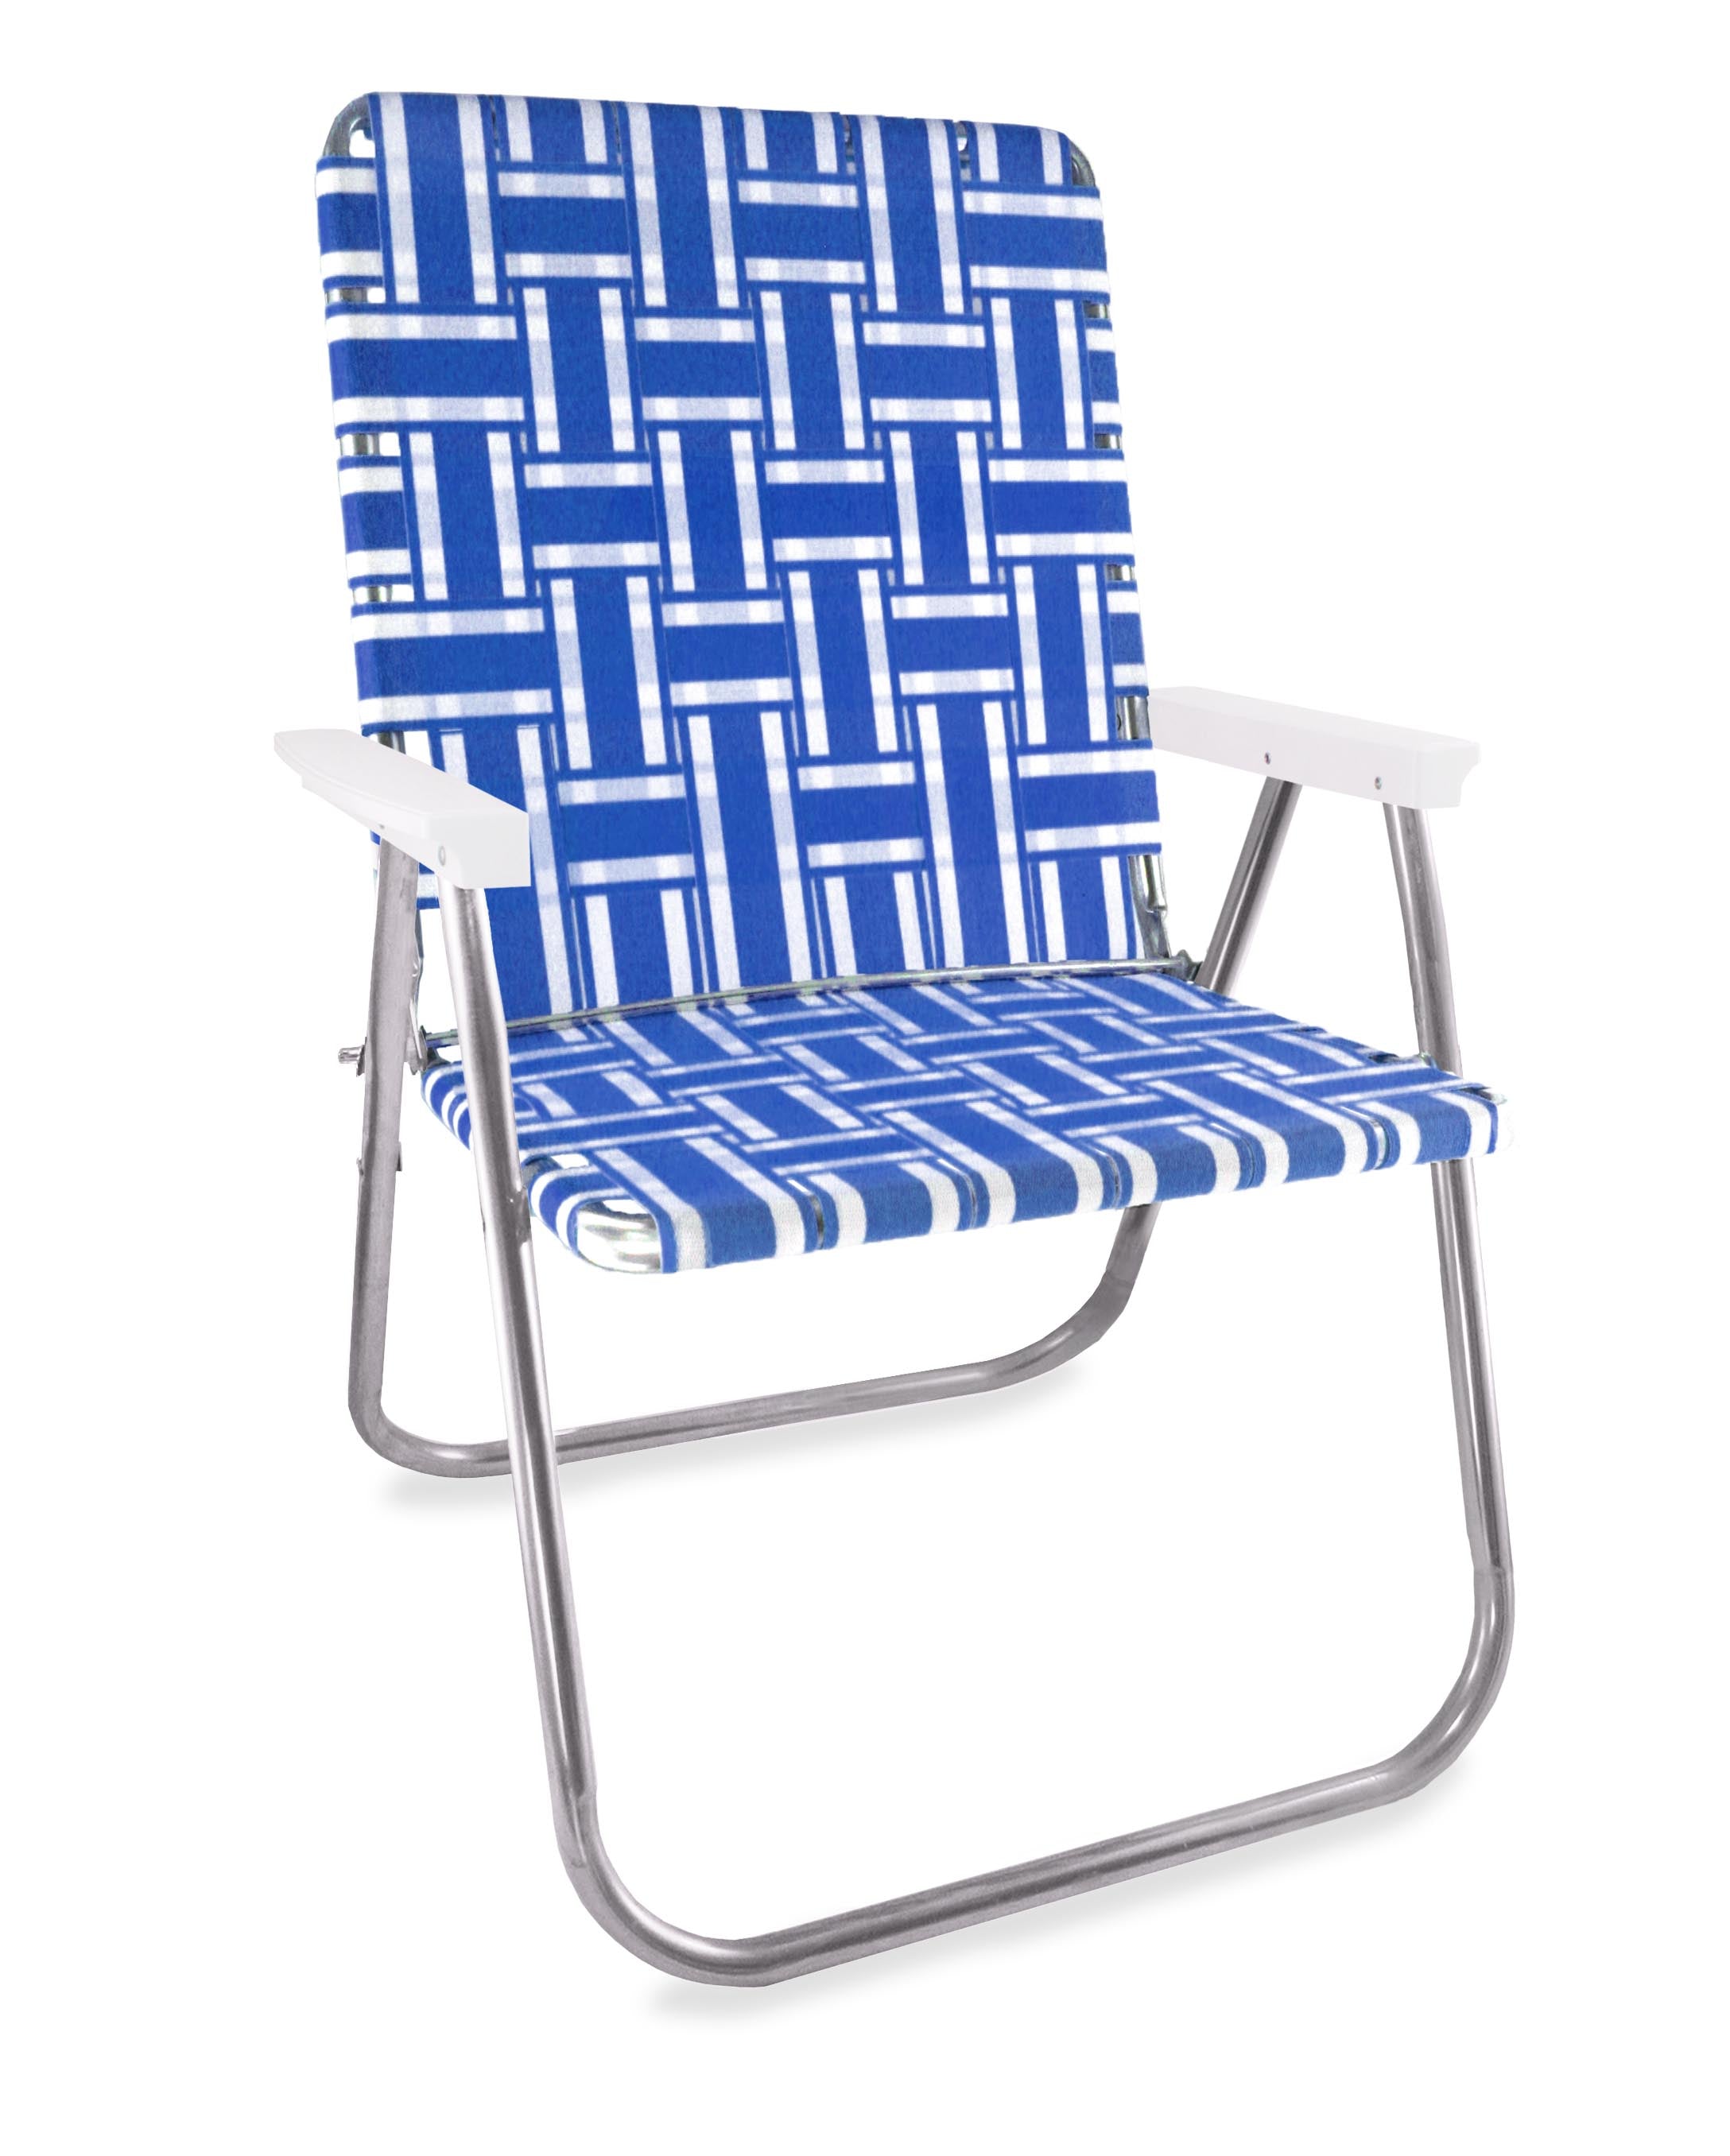 Lawn Chair USA Blue and White Stripe Aluminum Webbing Magnum Chair with White Arms